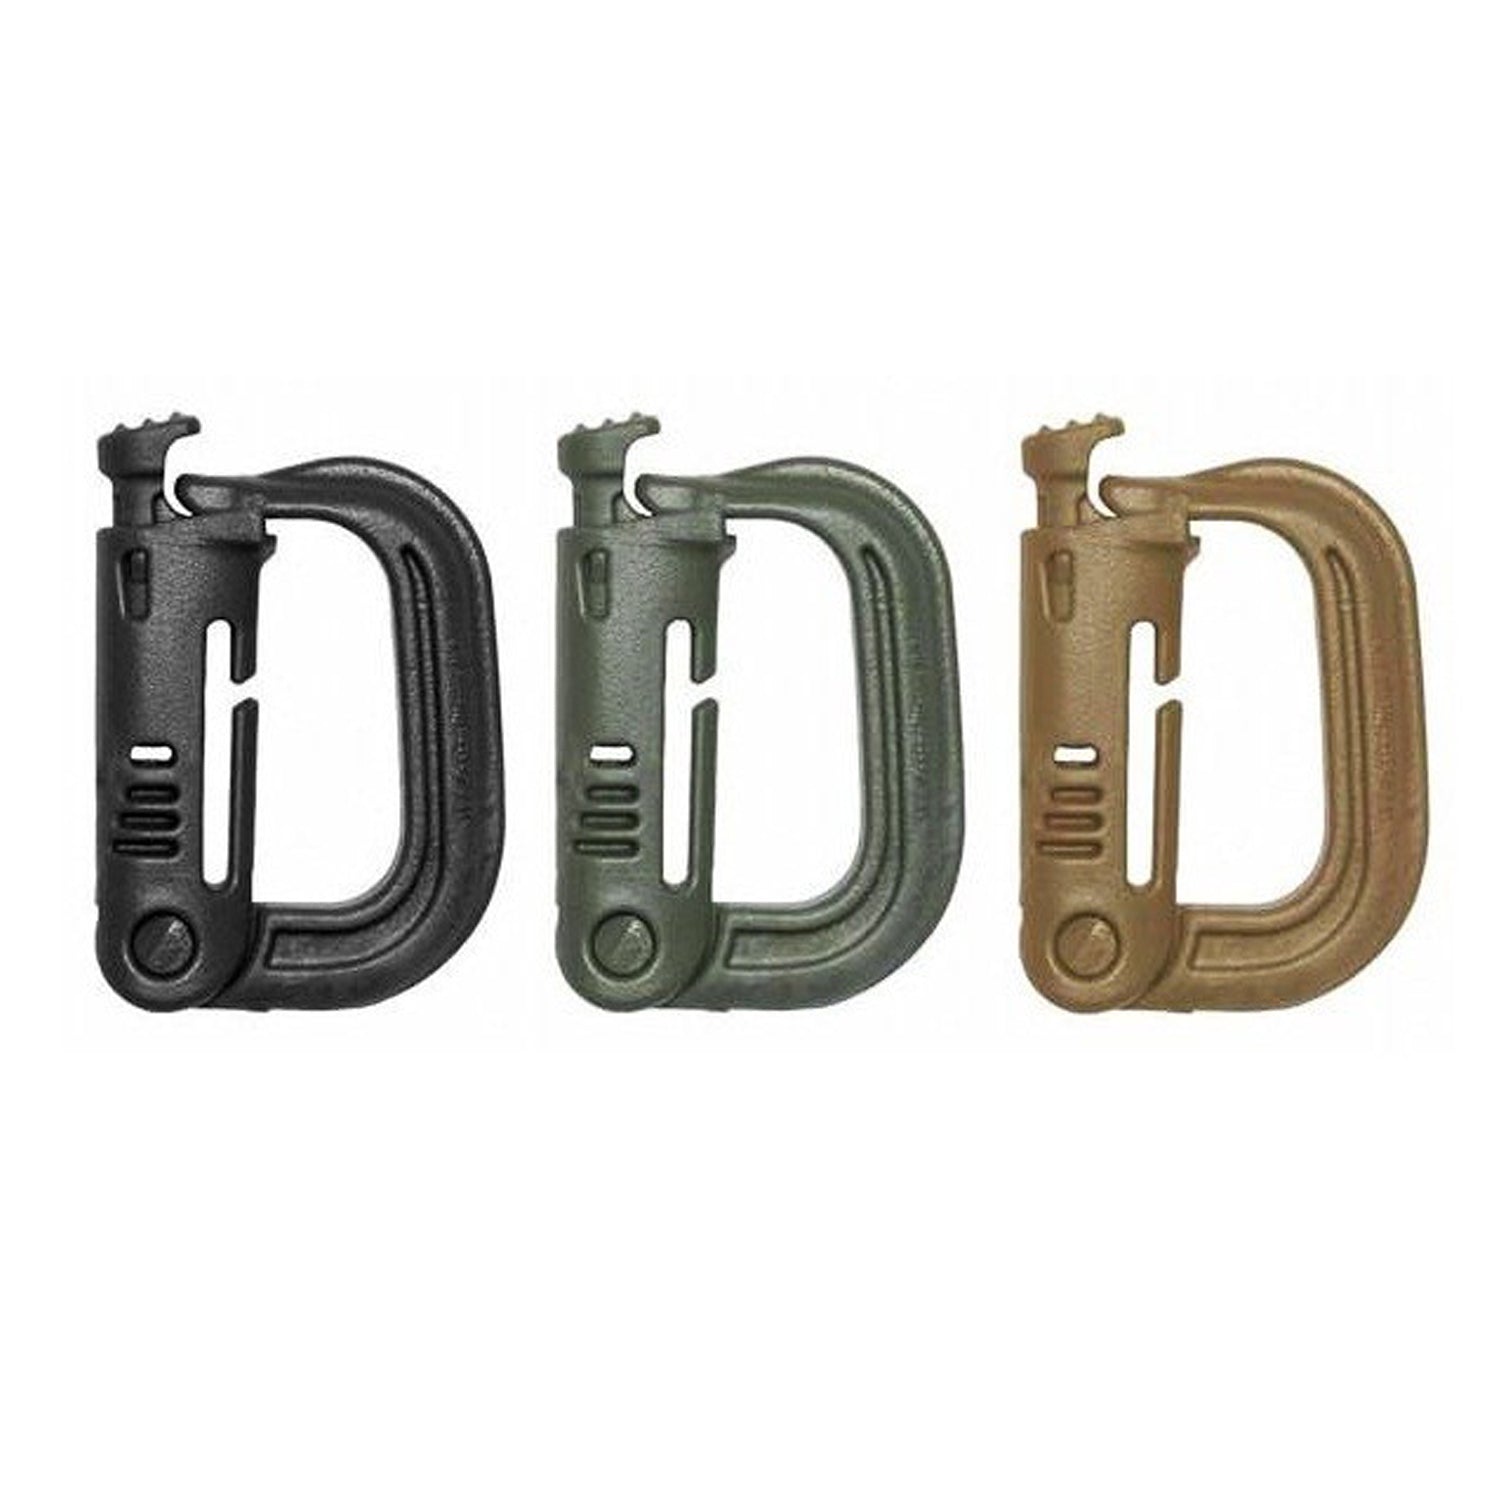 This carabiner is designed for use by operators in a tactical environment as a lightweight corrosion resistant replacement for heavy metal climbing carabiners. The high strength polymer structure easily supports weapon sling connection points to body armor, and features a break away design to eliminate snags. This carabiner is perfectly suited for connecting your tactical accessories that require quick and easy one-handed access.